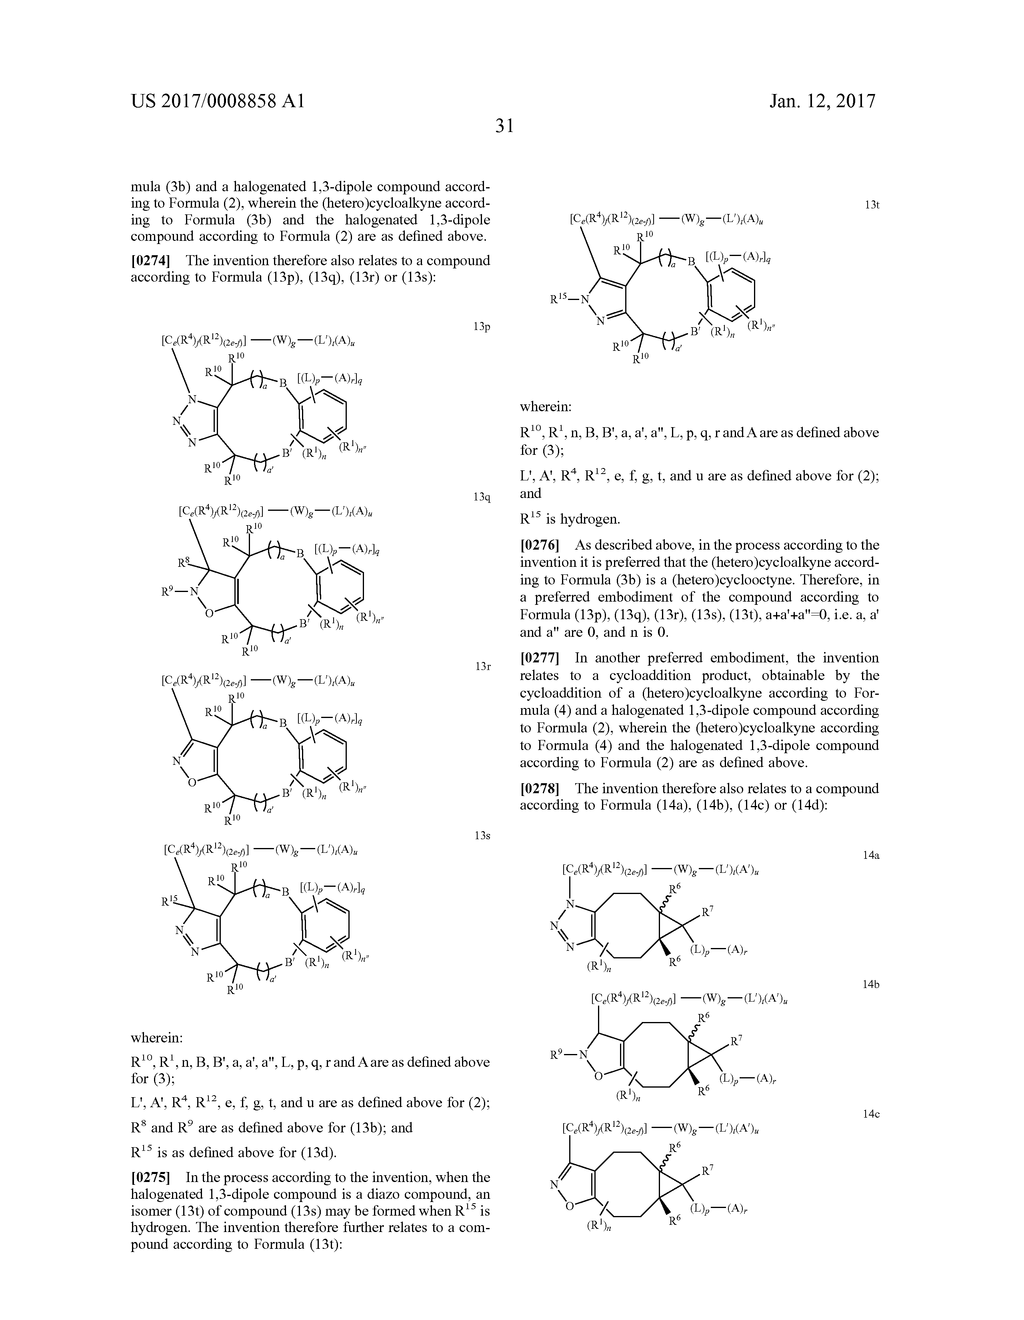 PROCESS FOR THE CYCLOADDITION OF A HALOGENATED 1,3-DIPOLE COMPOUND WITH A     (HETERO)CYCLOALKYNE - diagram, schematic, and image 41